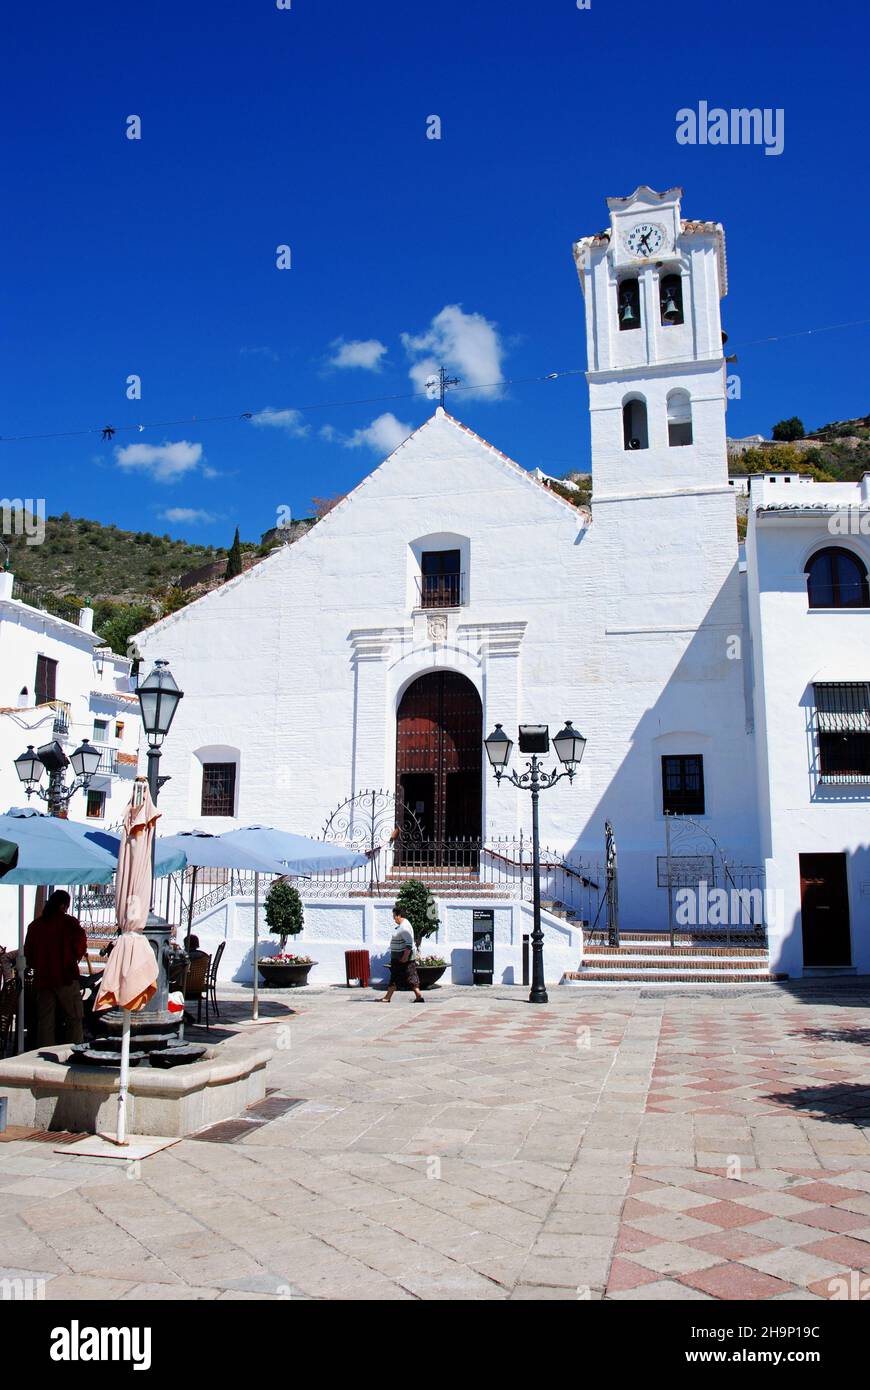 View of San Antonio Church with a pavement cafe in the foreground, Frigiliana, Spain. Stock Photo